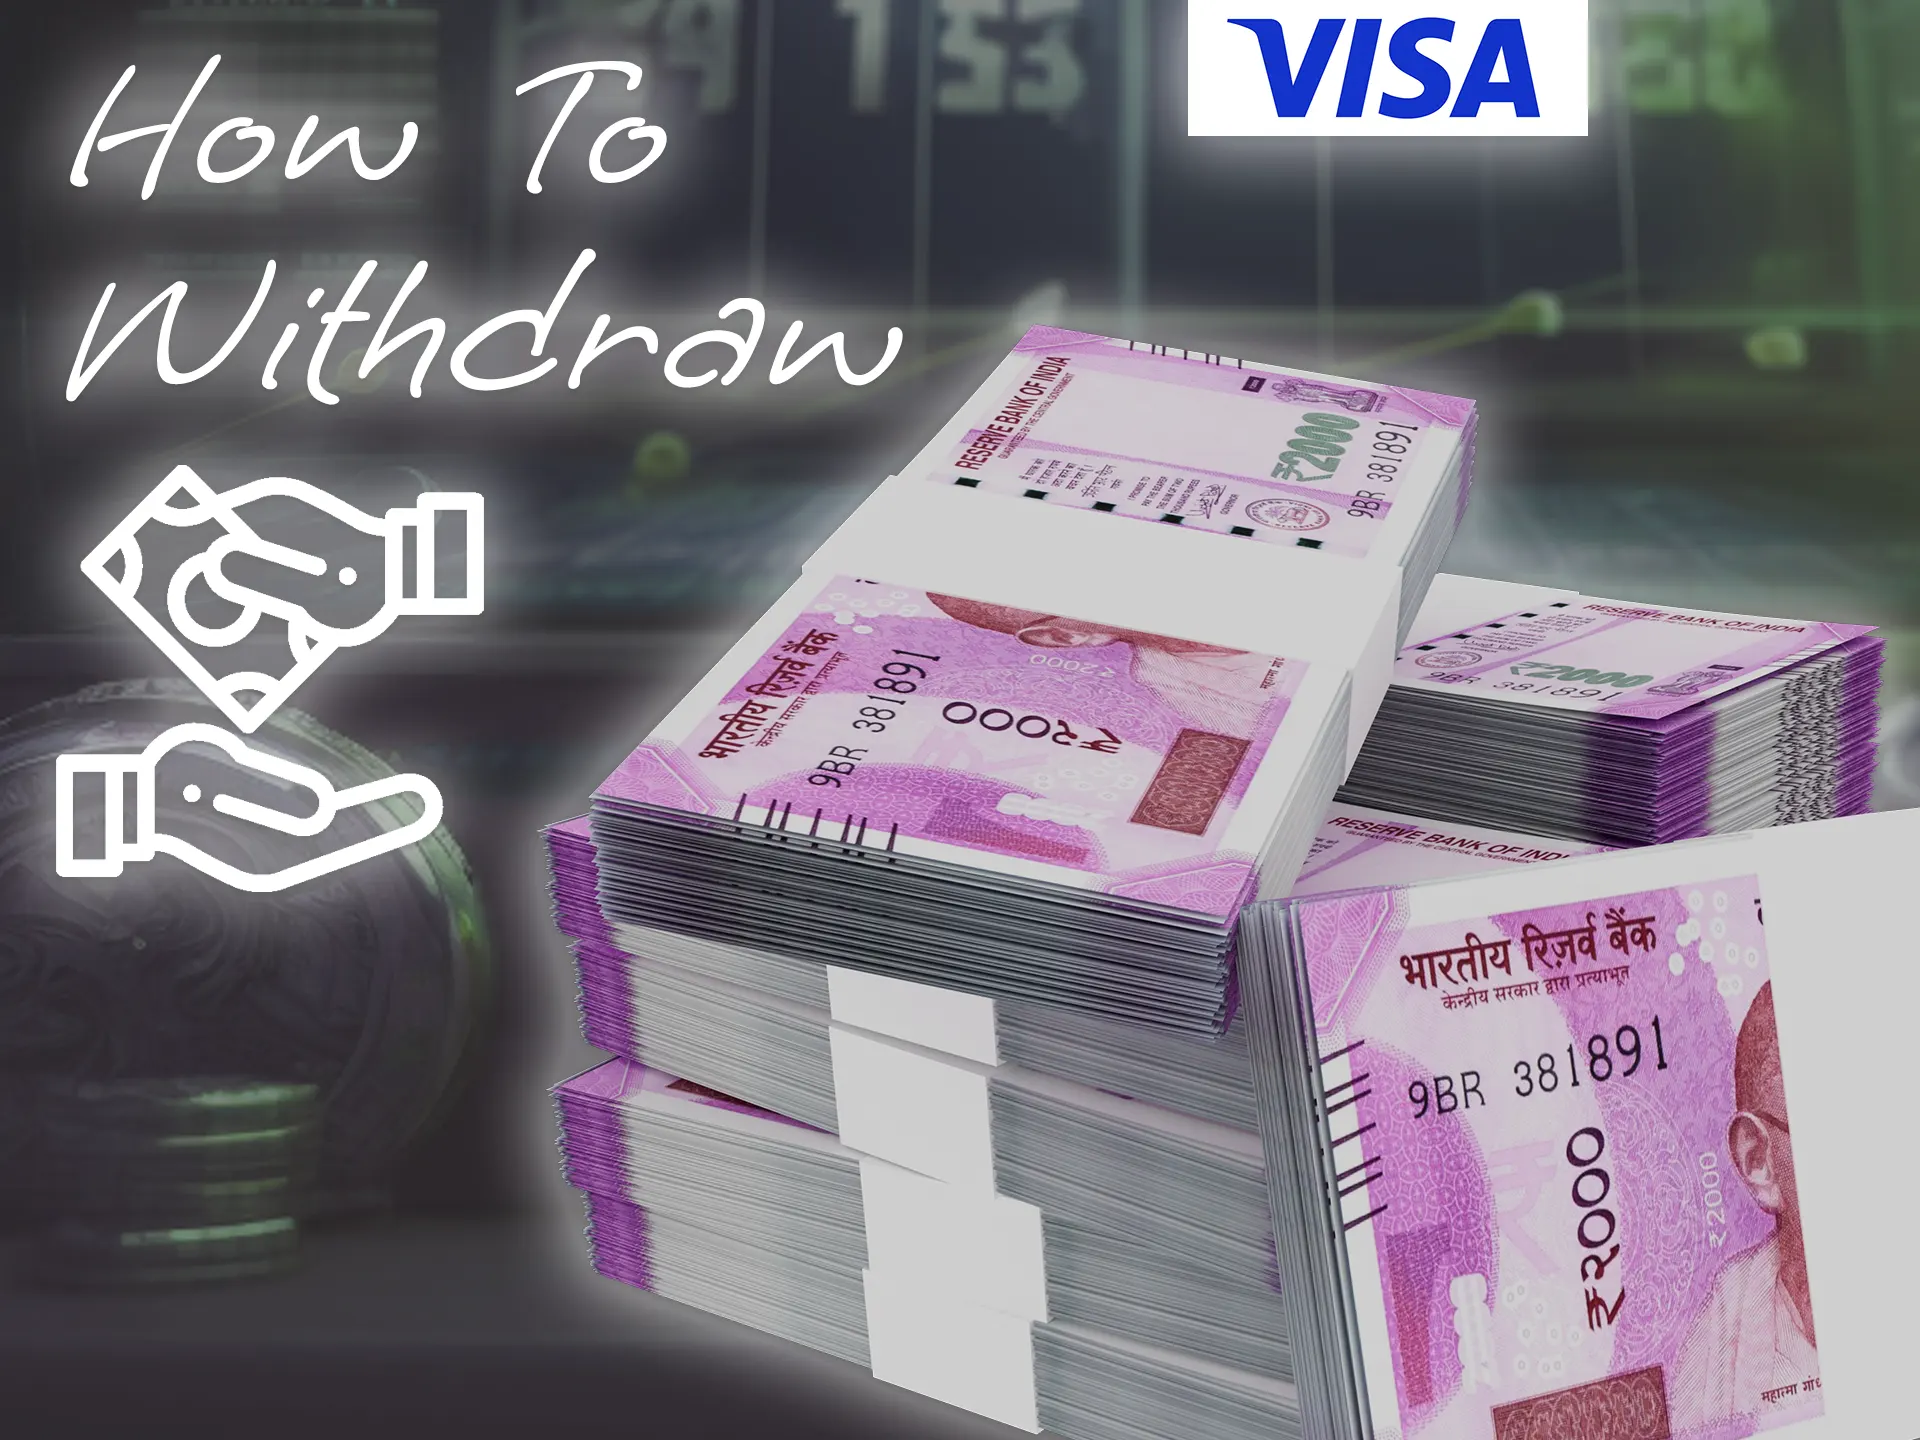 Withdraw money from your gaming account using the Visa payment system.